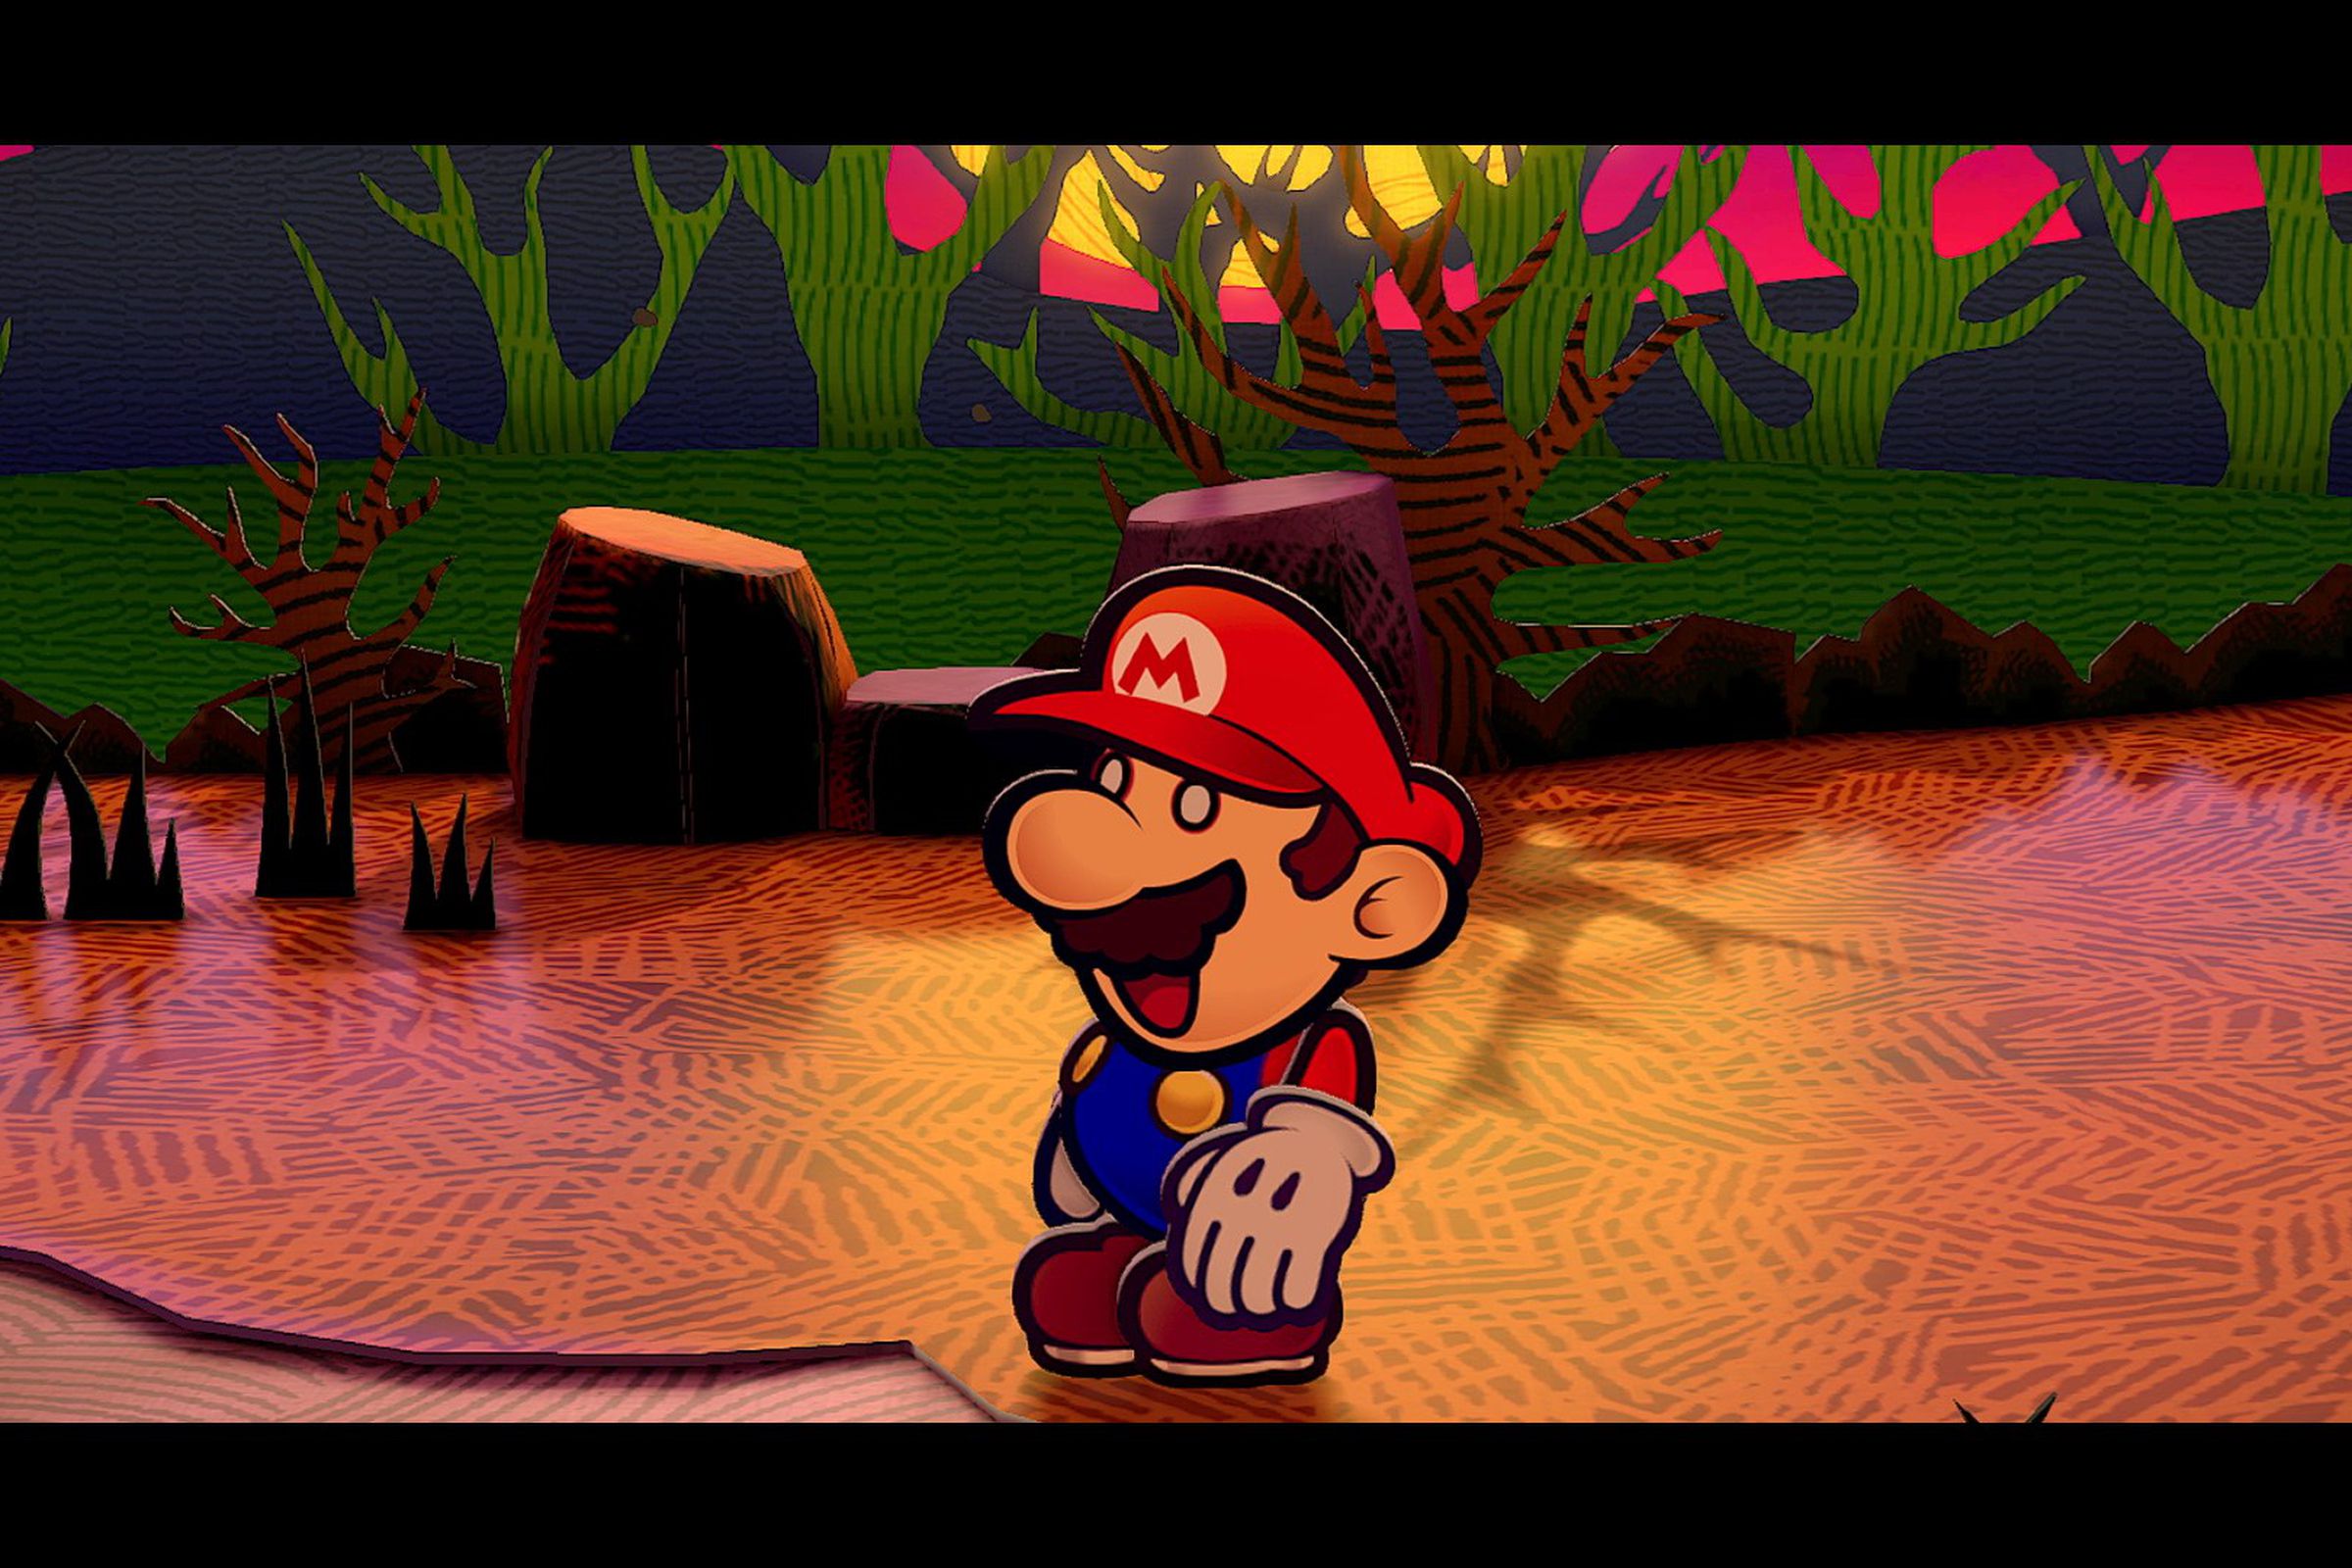 A screenshot from Paper Mario: The Thousand-year Door.